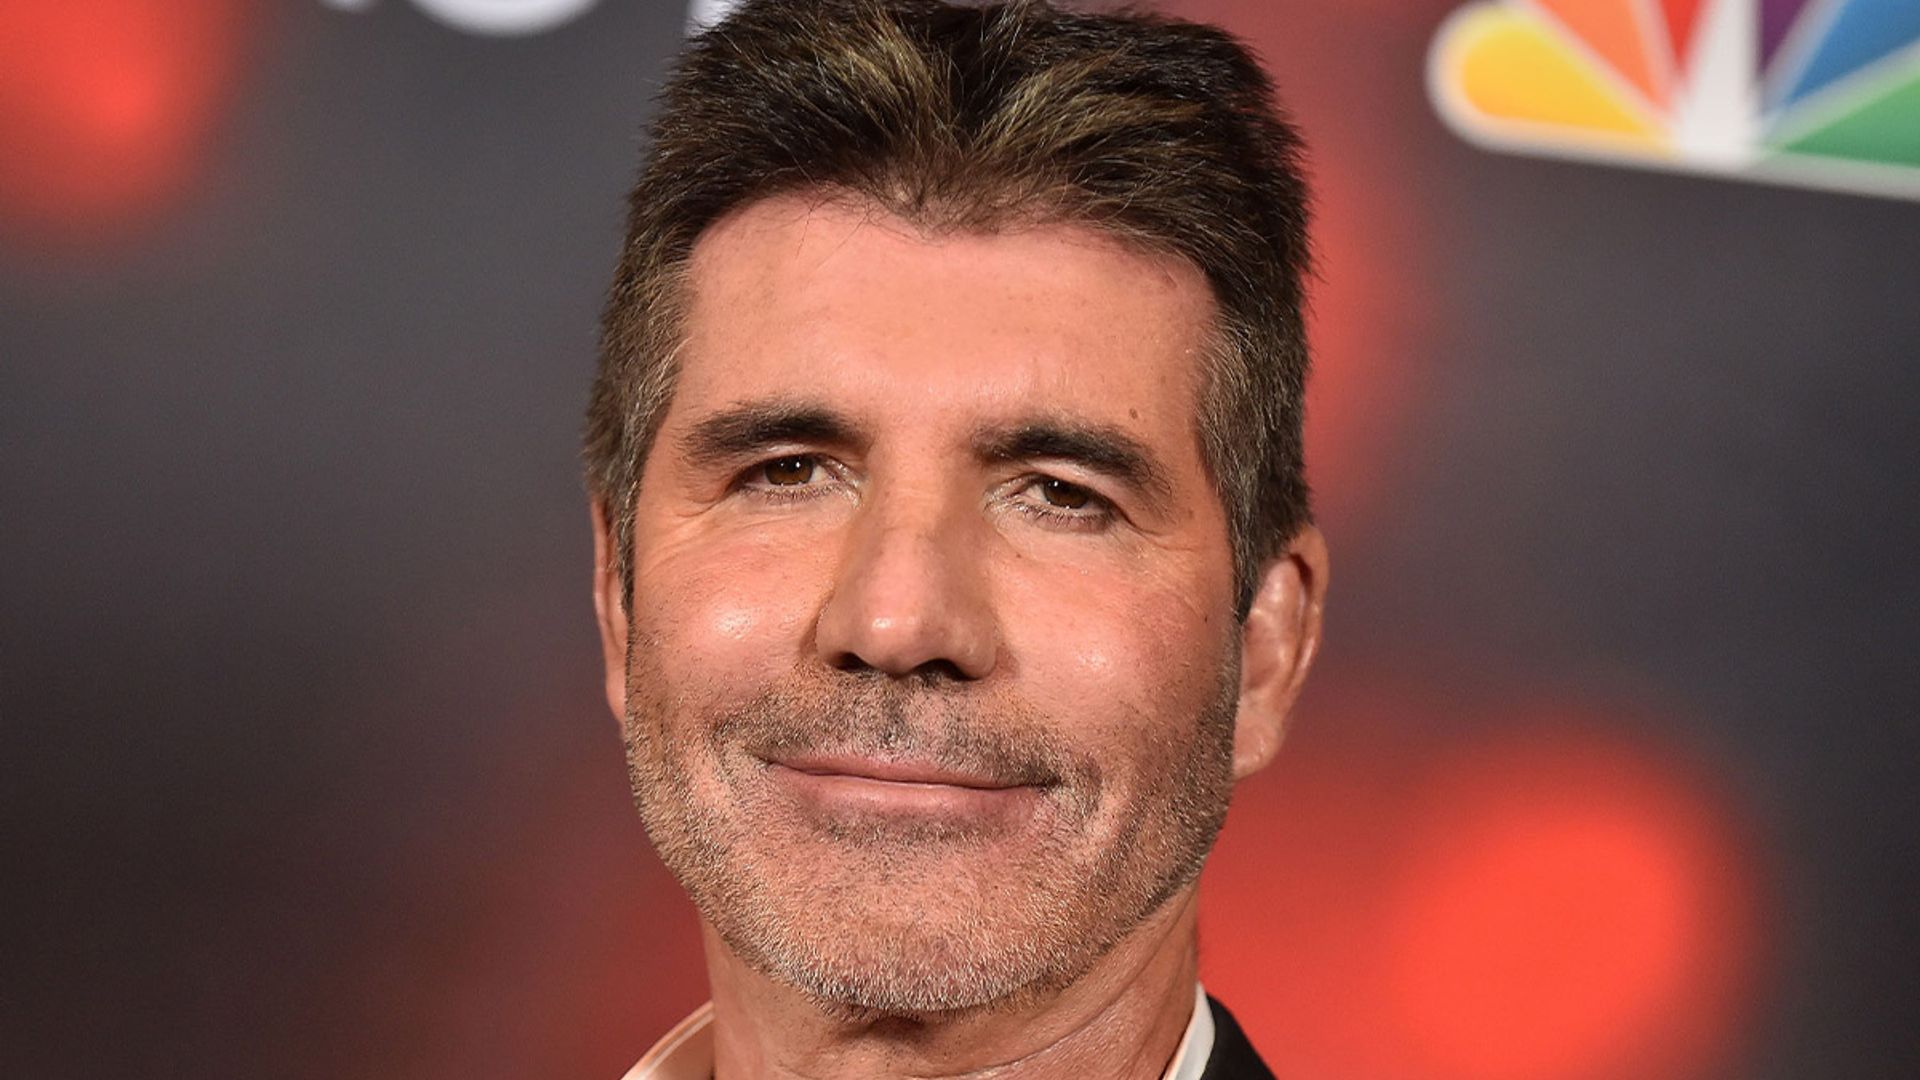 Know Actor Simon Cowell's Net Worth - Career, Salary, Personal Life, and More!